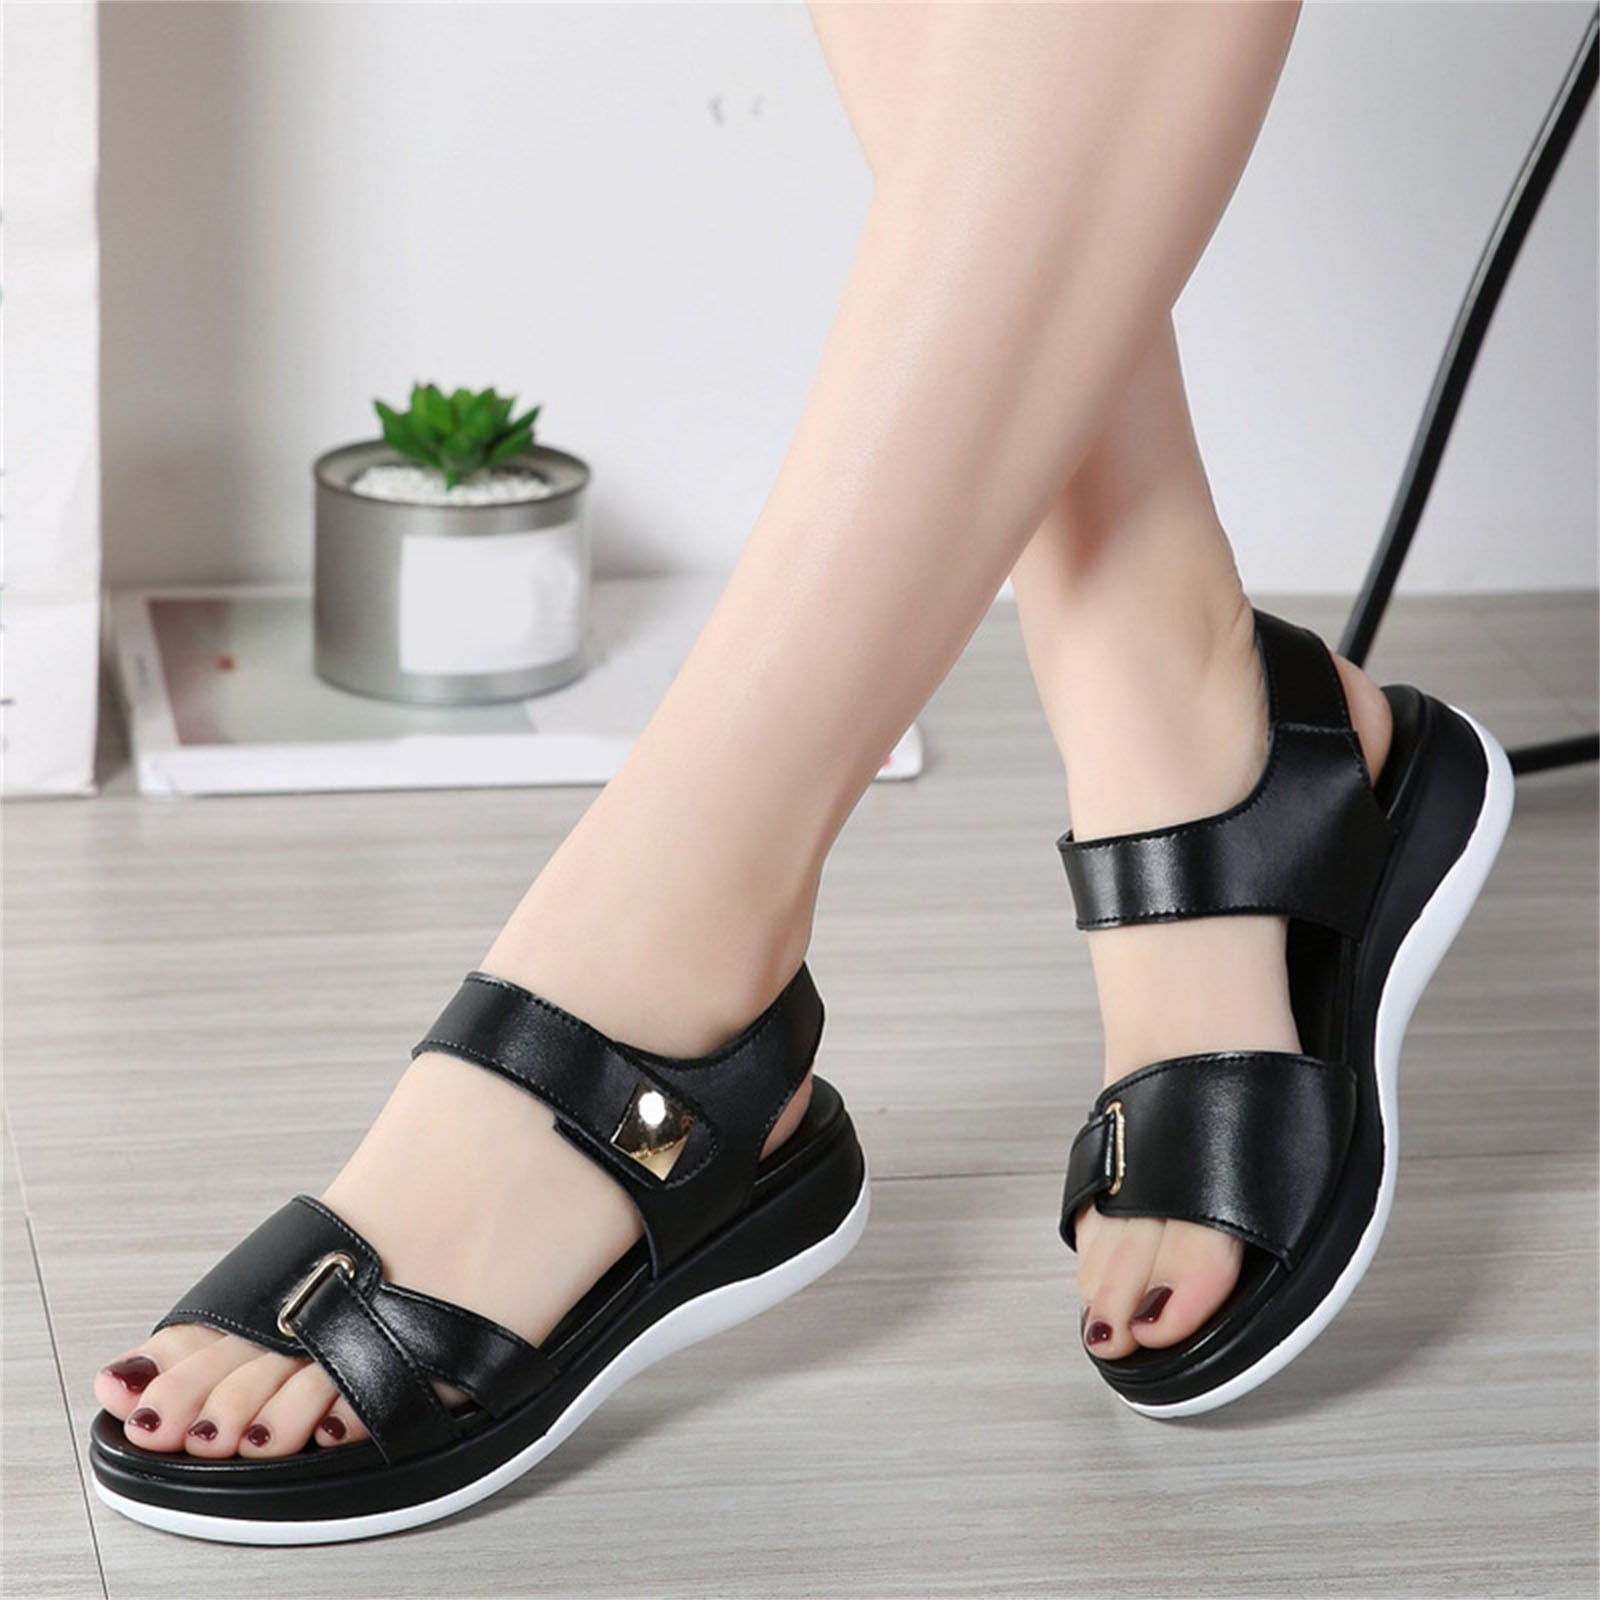 Share 270+ casual flat sandals for ladies